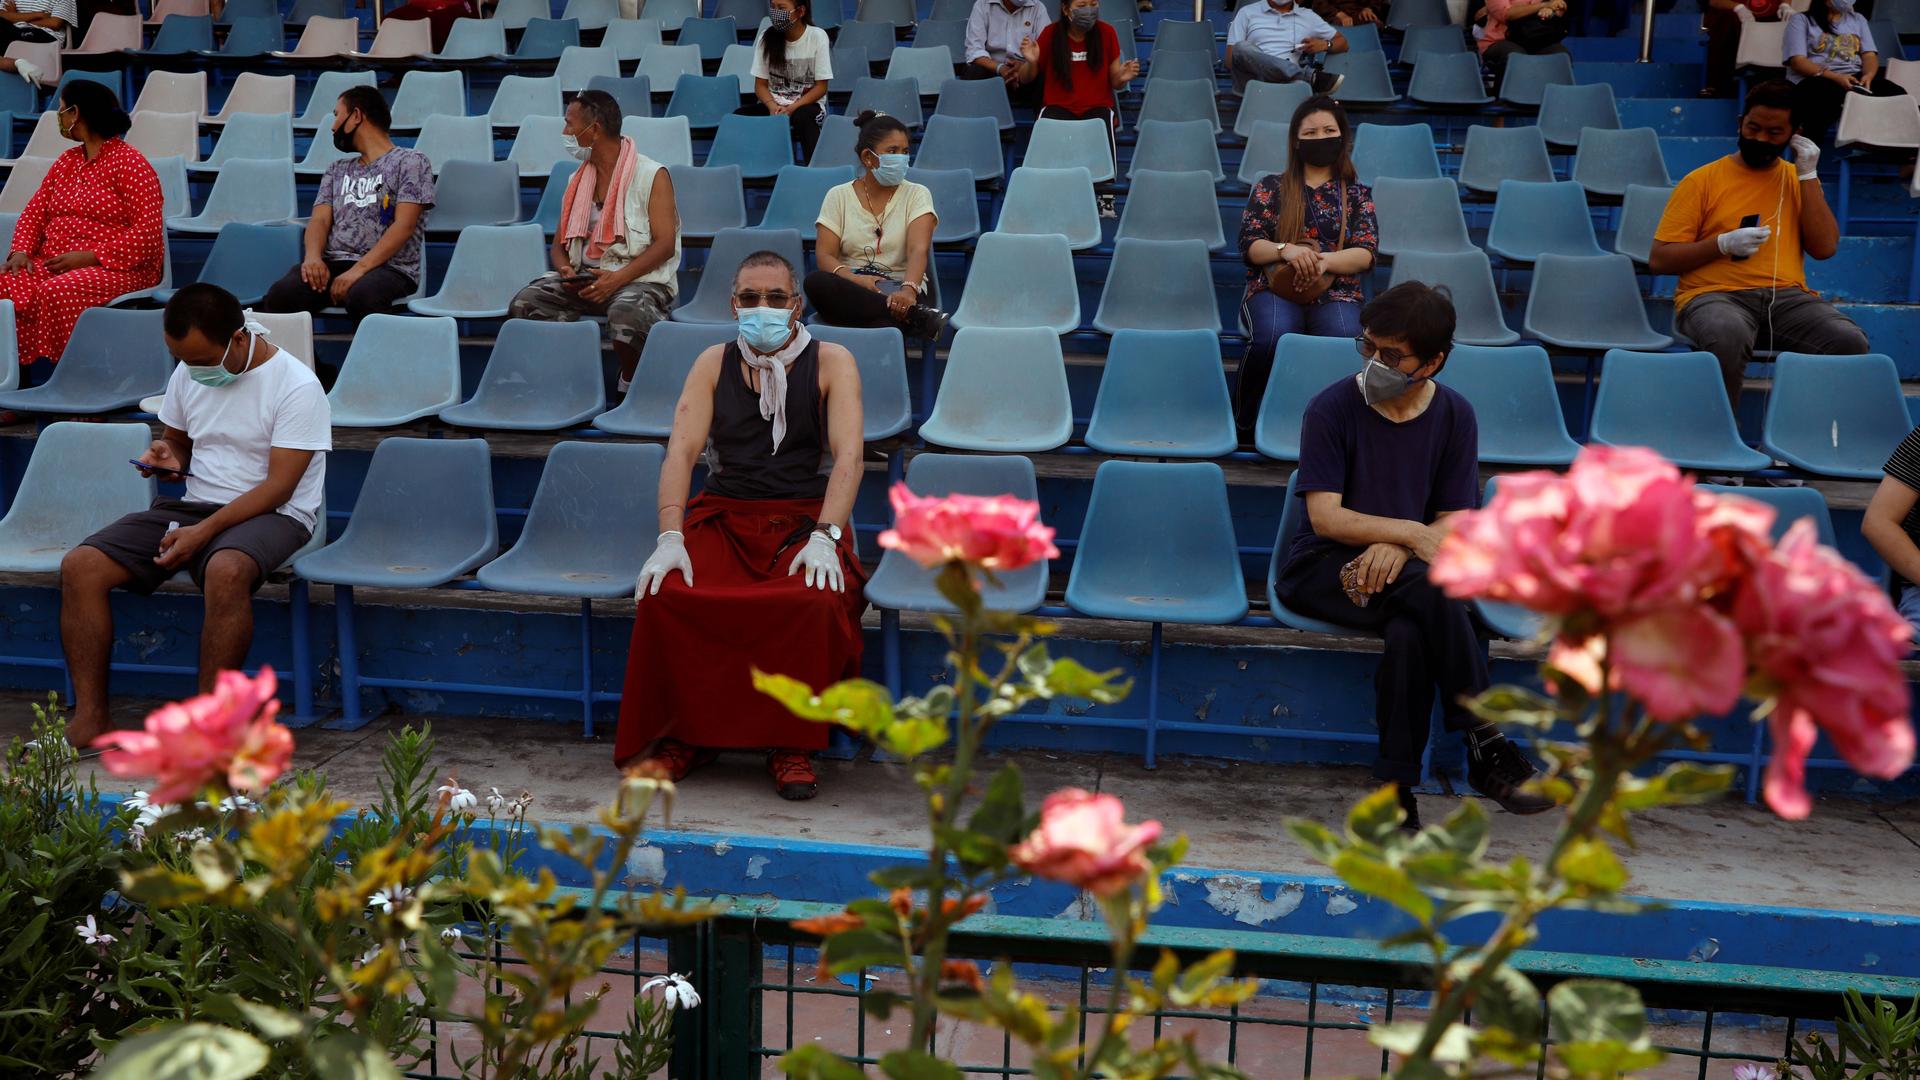 Stranded residents of Ladakh, a union territory in India, wait in a stadium for being thermal screened before taking buses back to Ladakh, after few restrictions were lifted by Delhi government during an extended nationwide lockdown to slow the spread of 